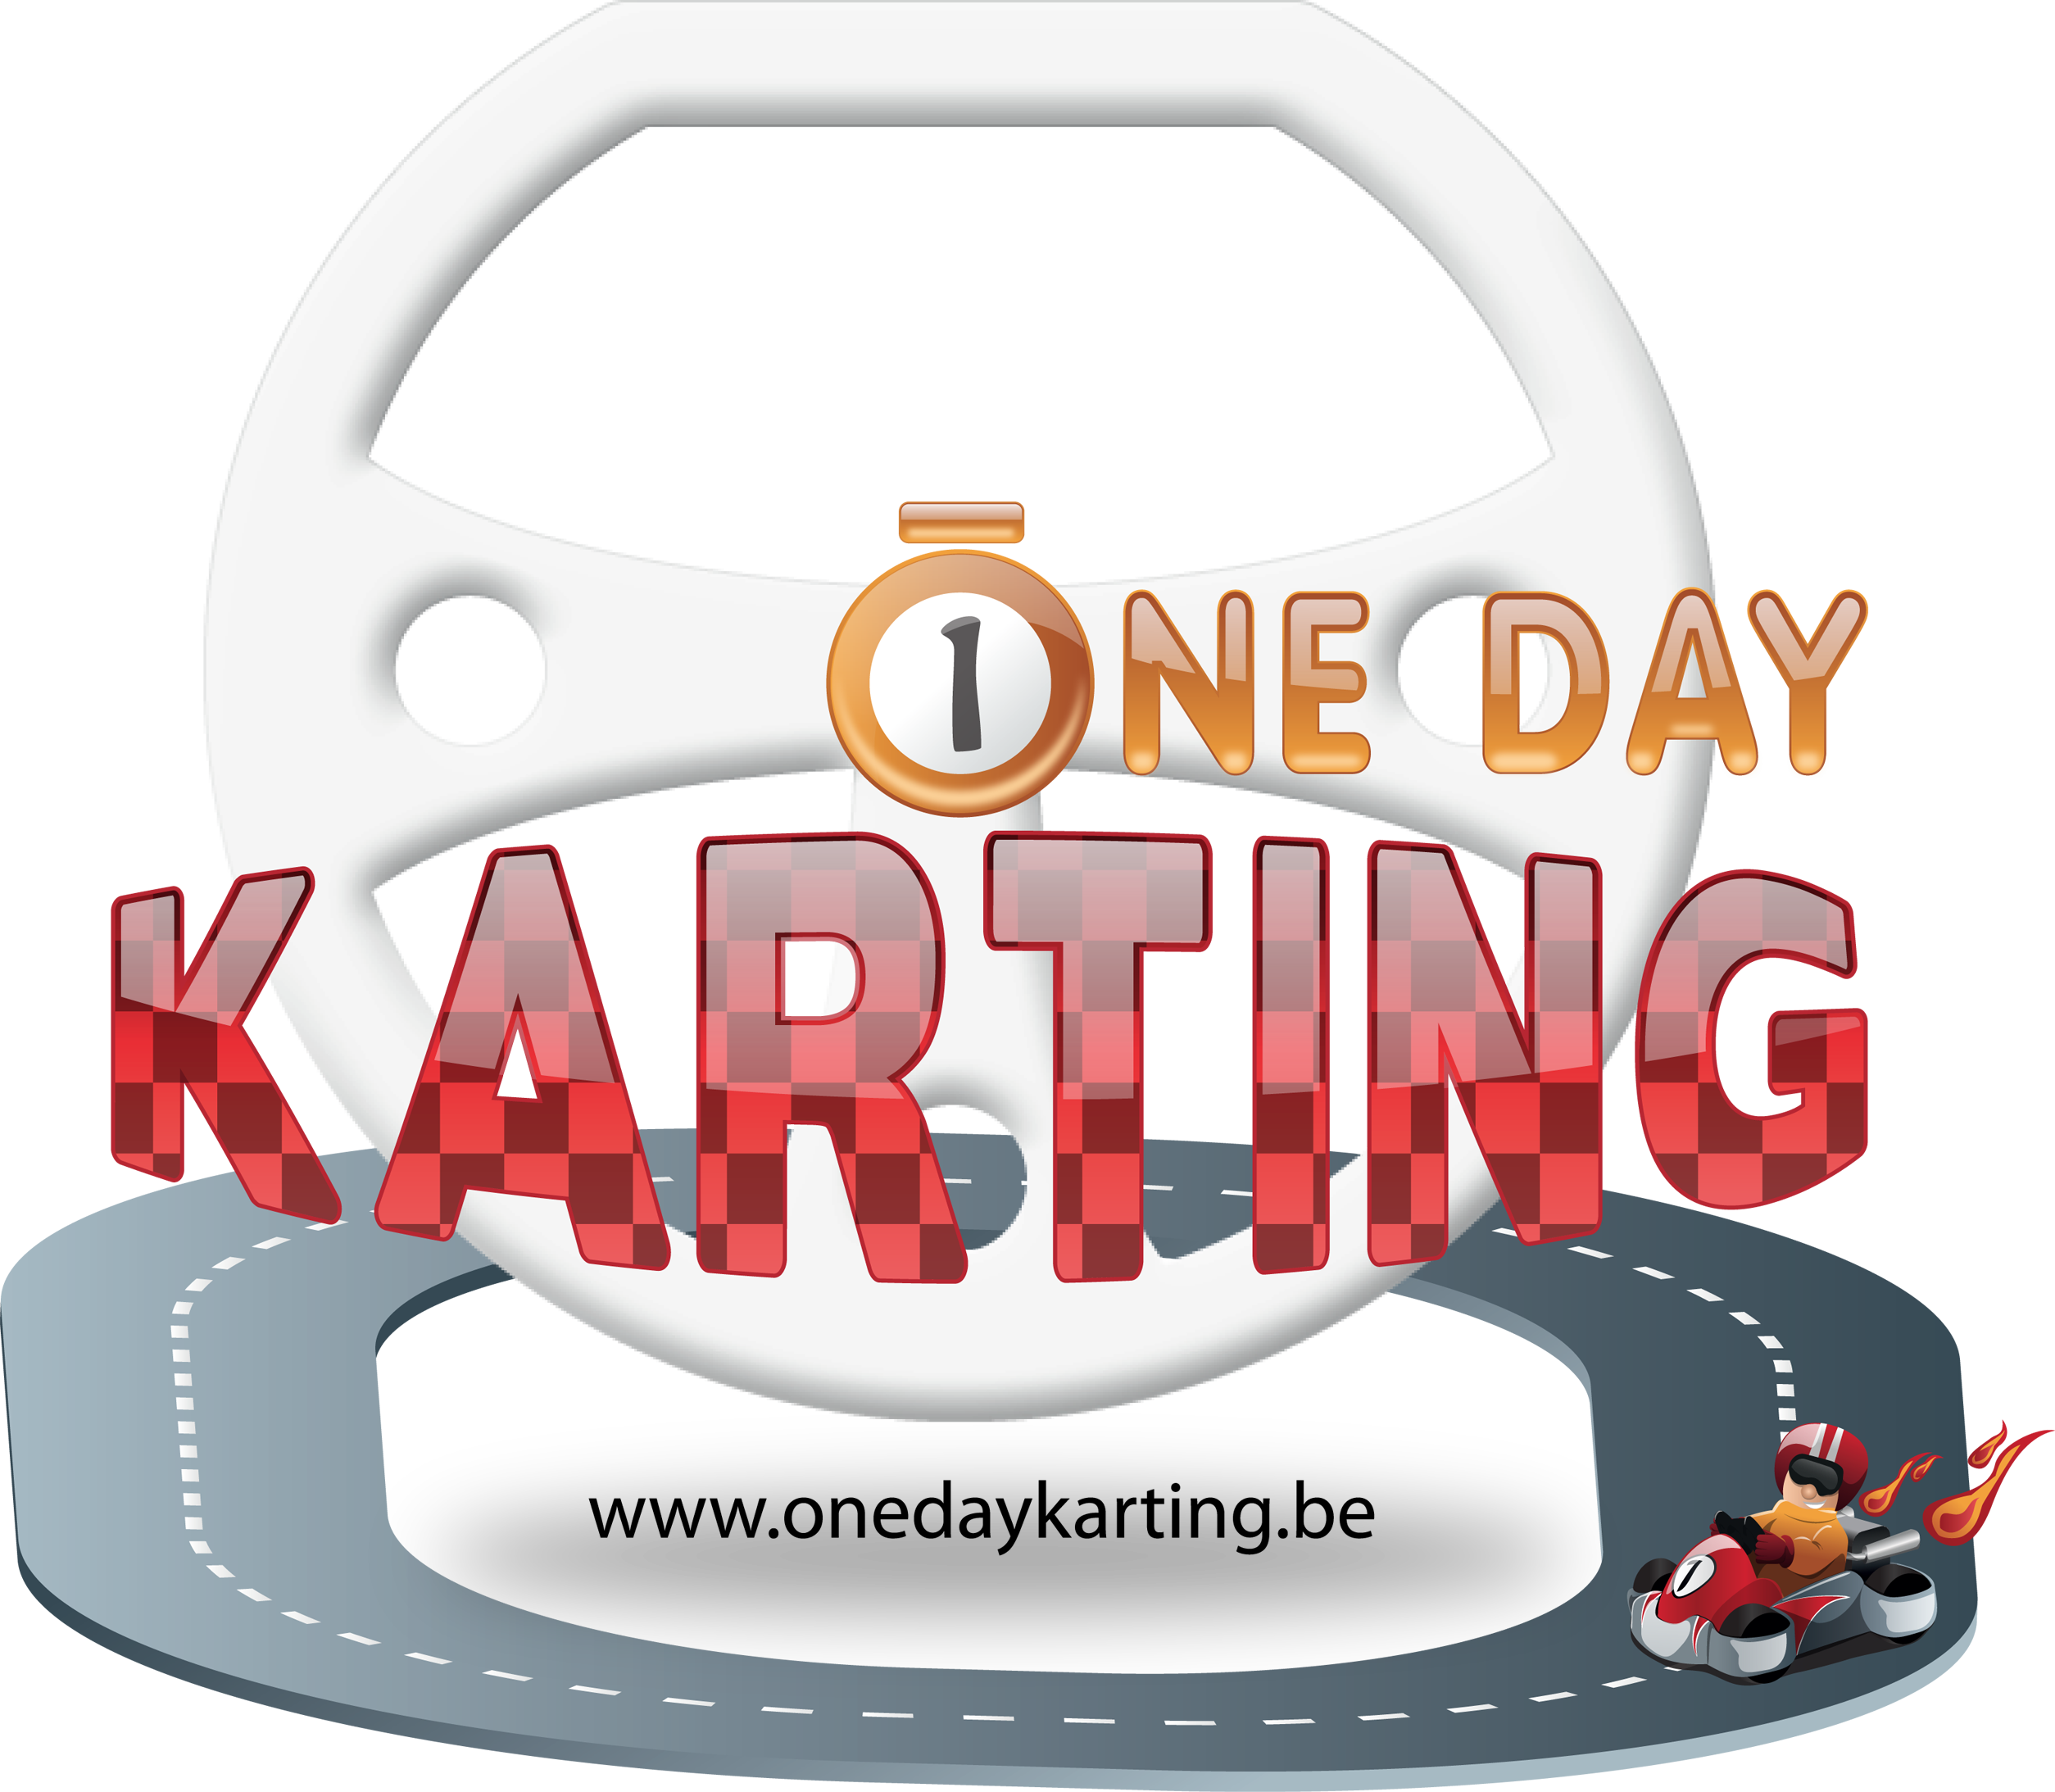 One Day Karting